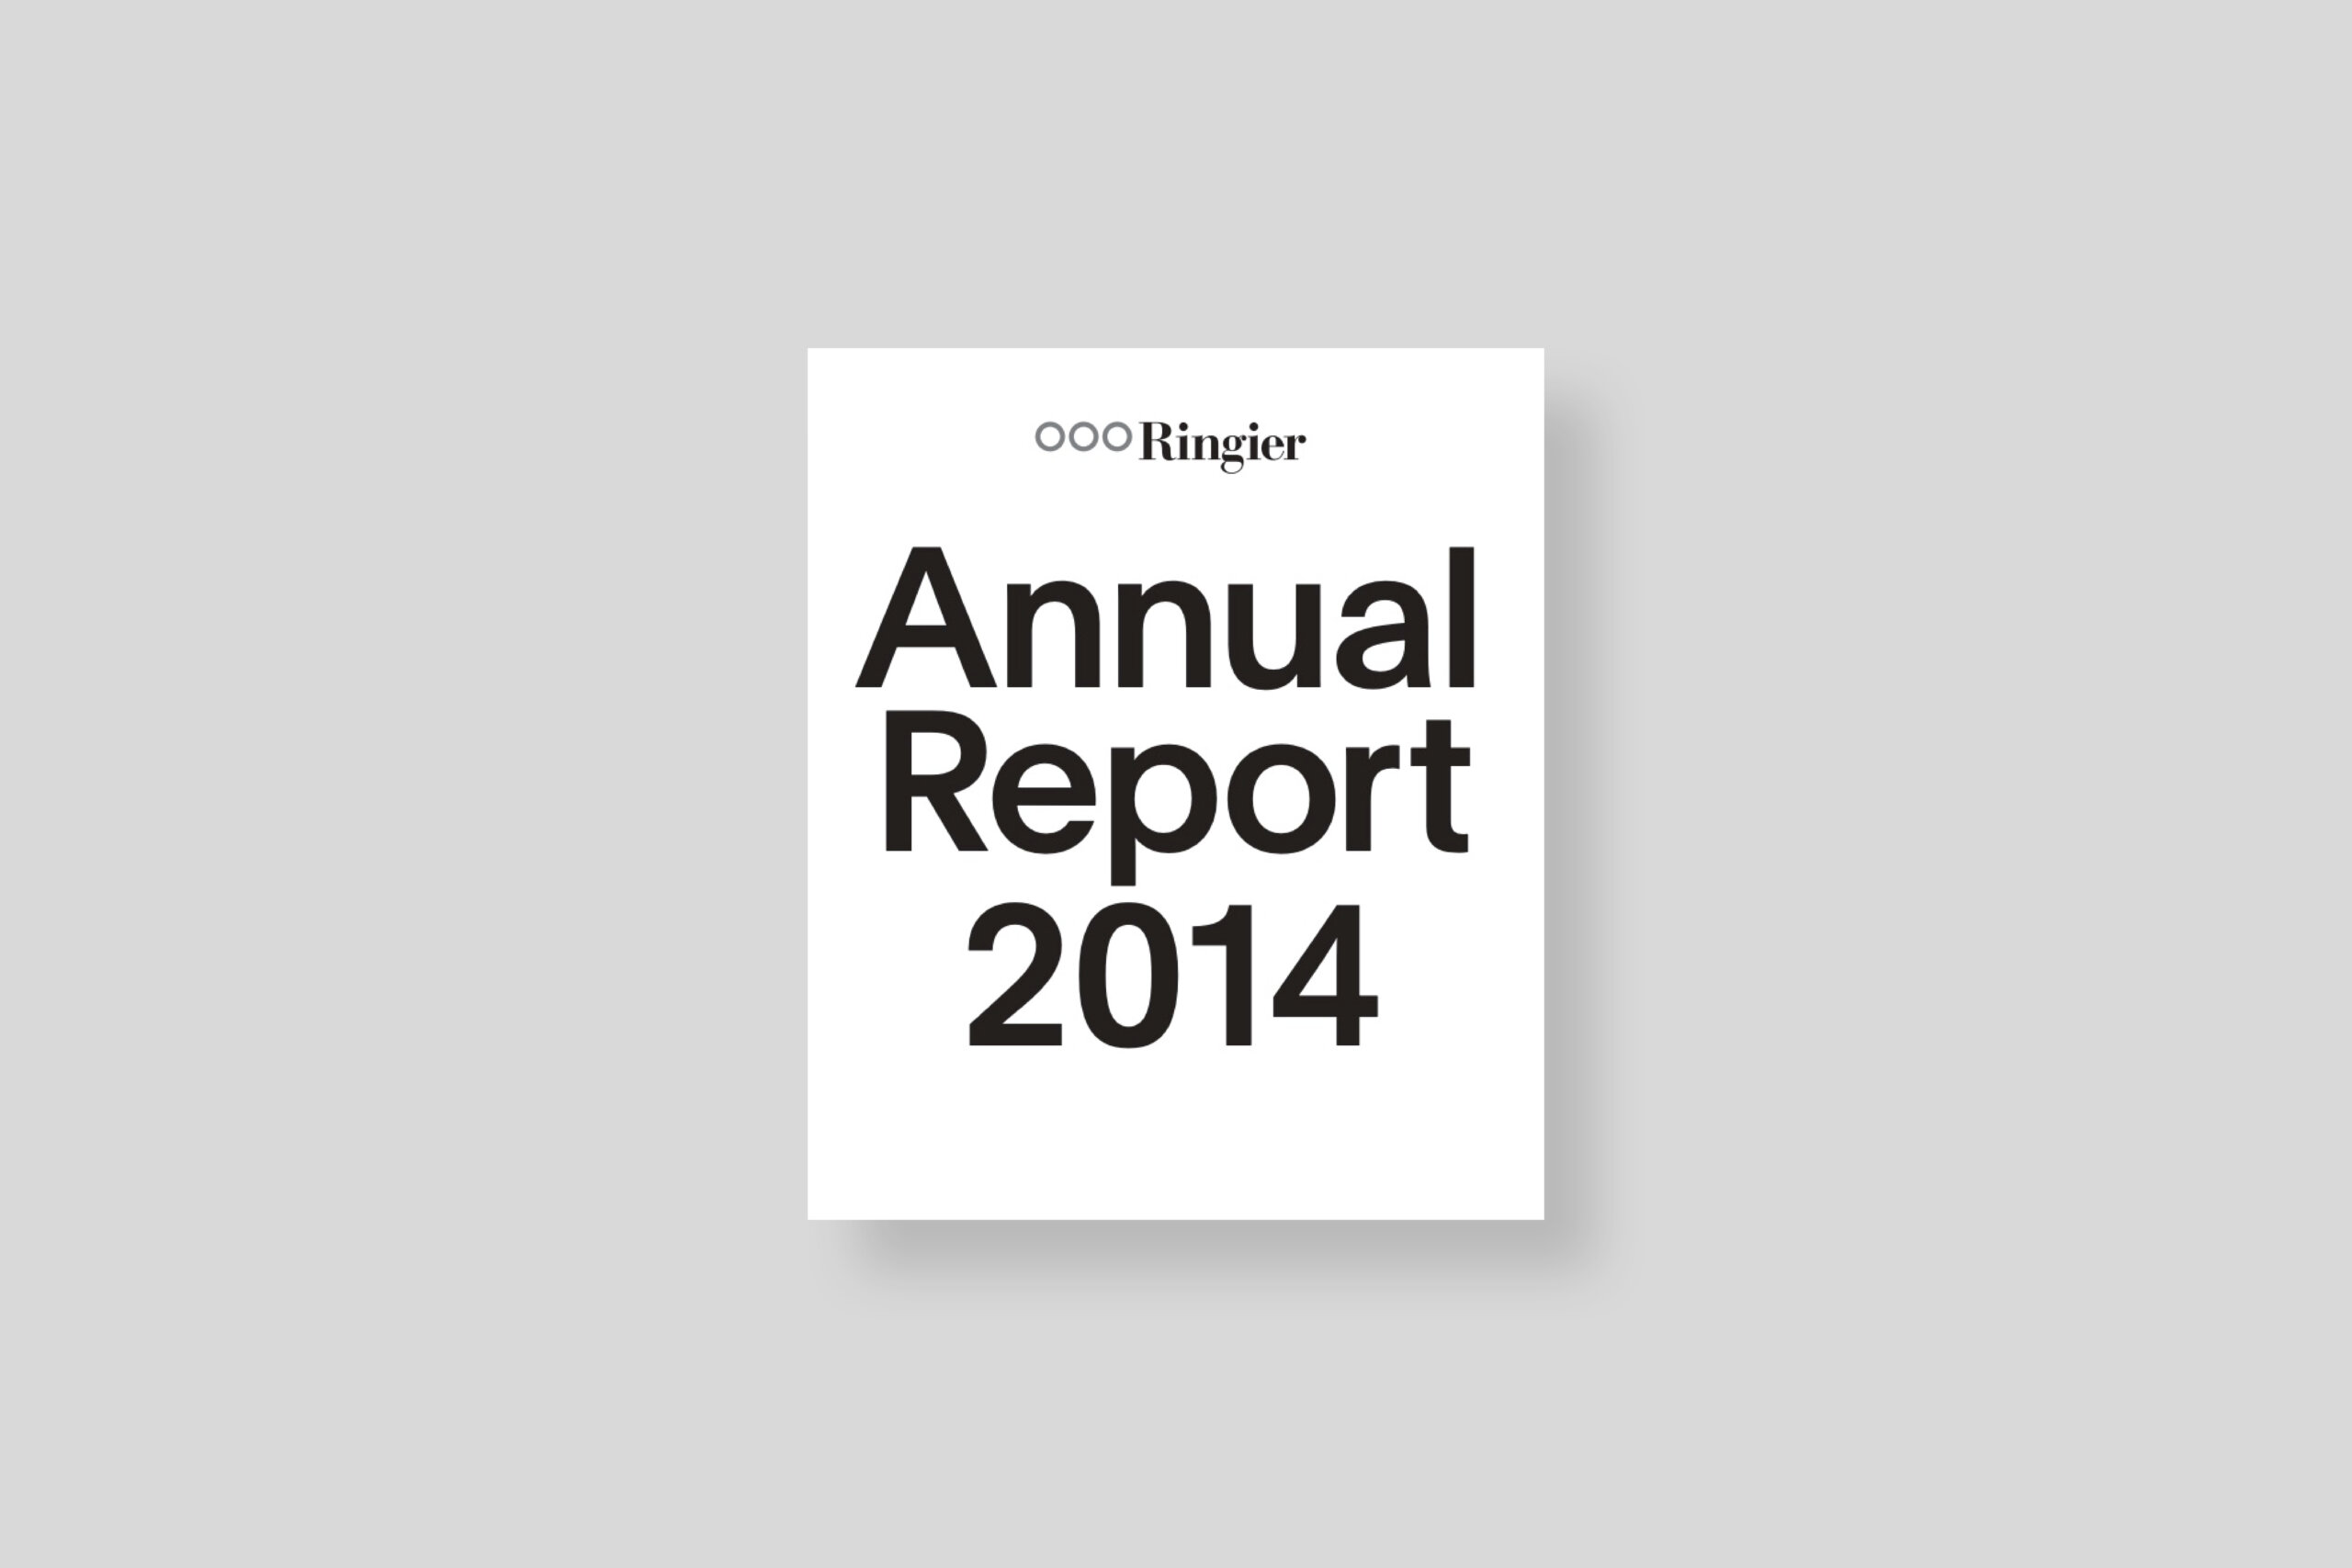 ringier-rapport-annuel-2014-wade-guyton-jrp-editions-cover-eng